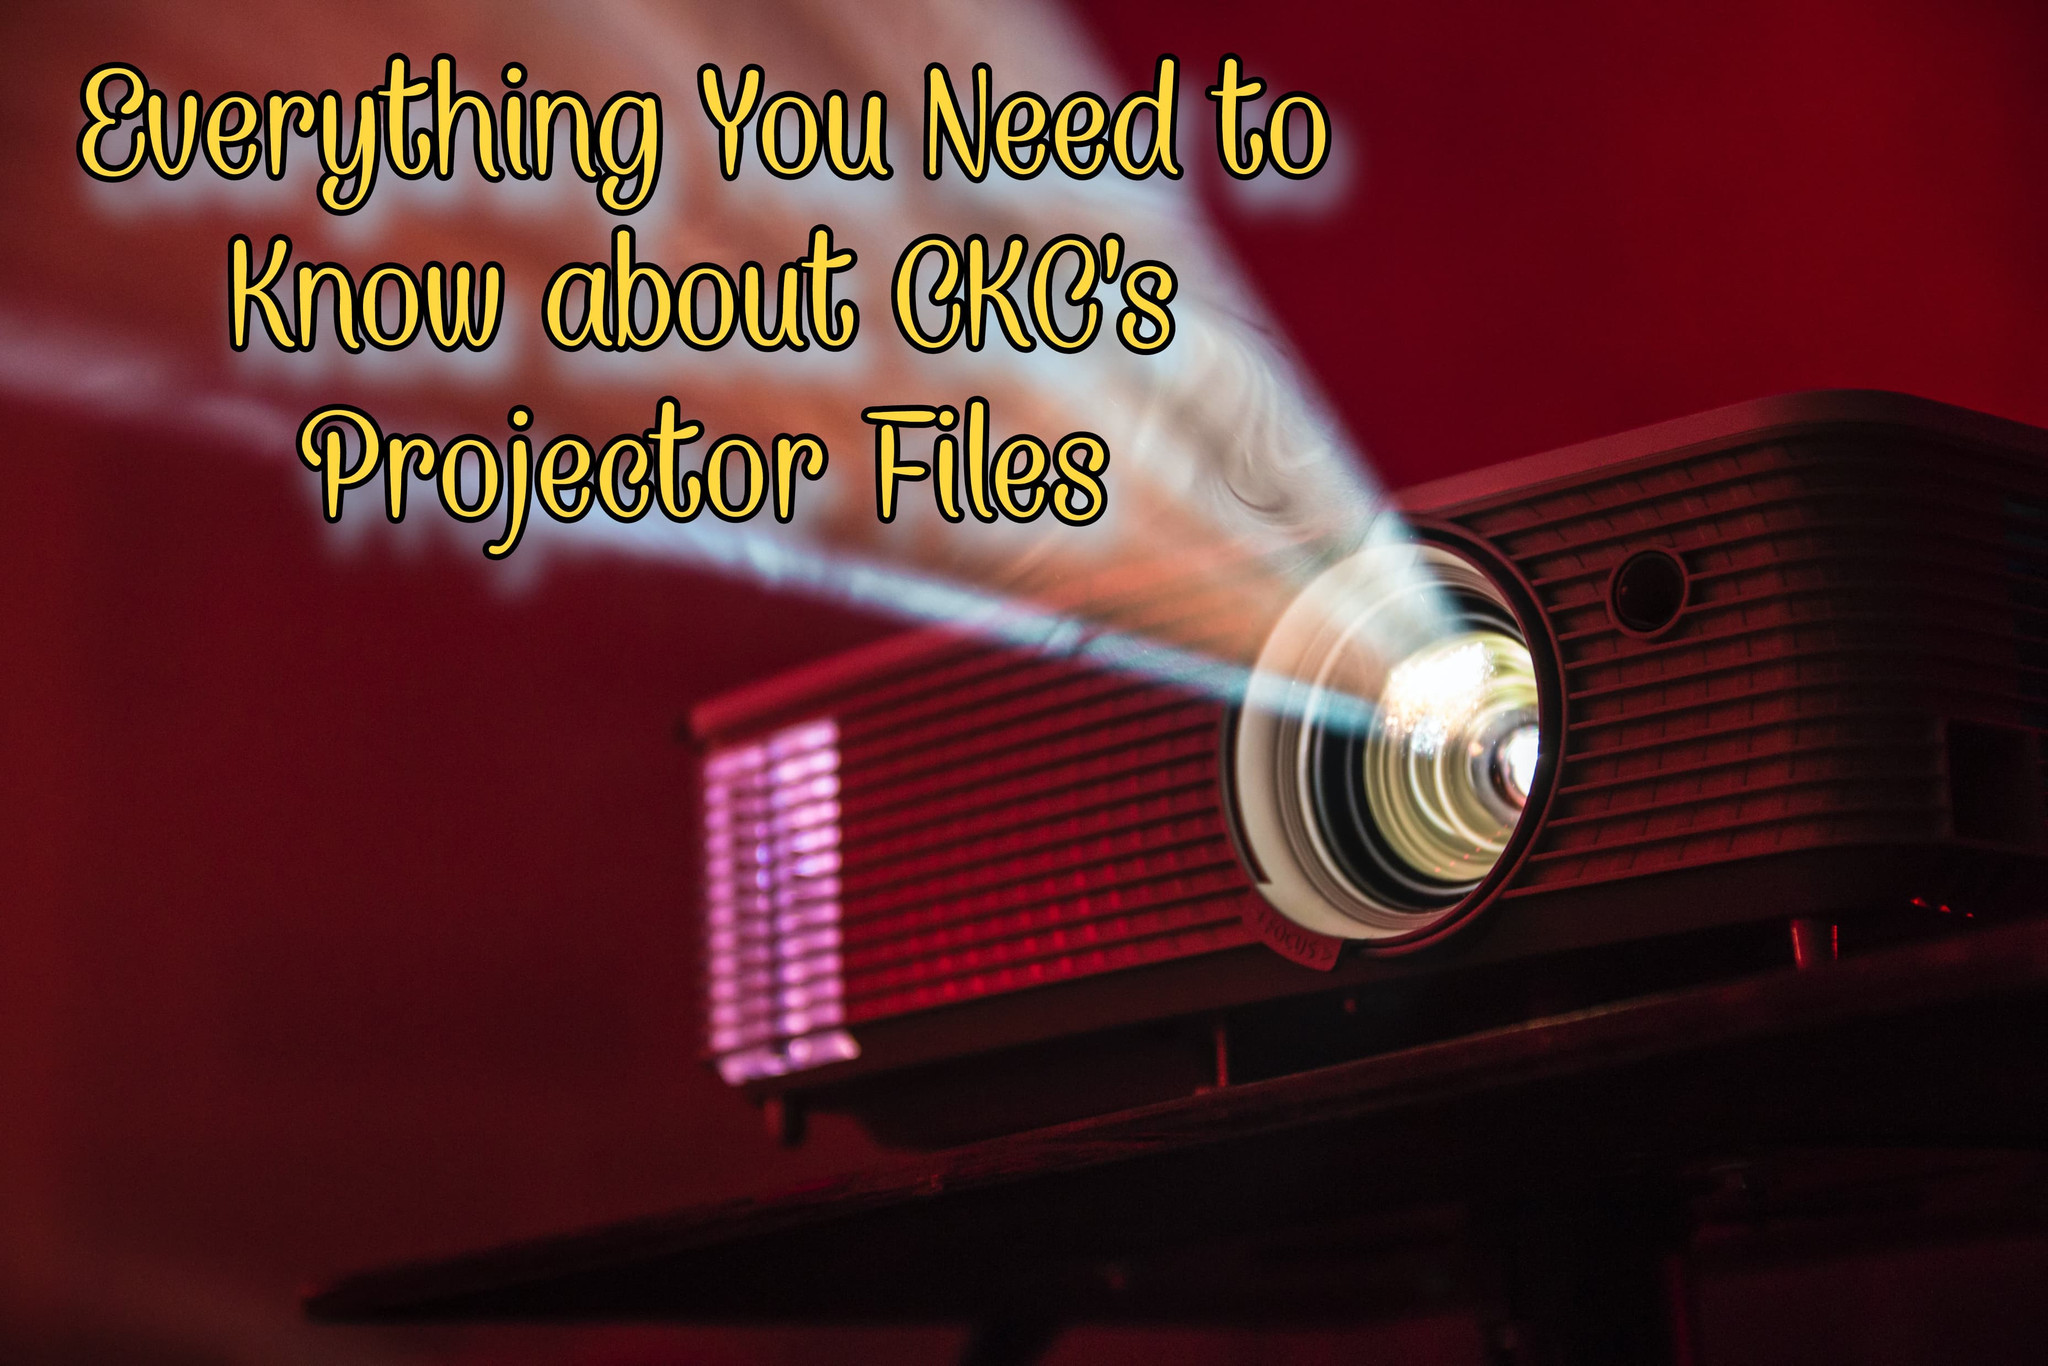 Everything You Need to Know About CKC's Projector Files